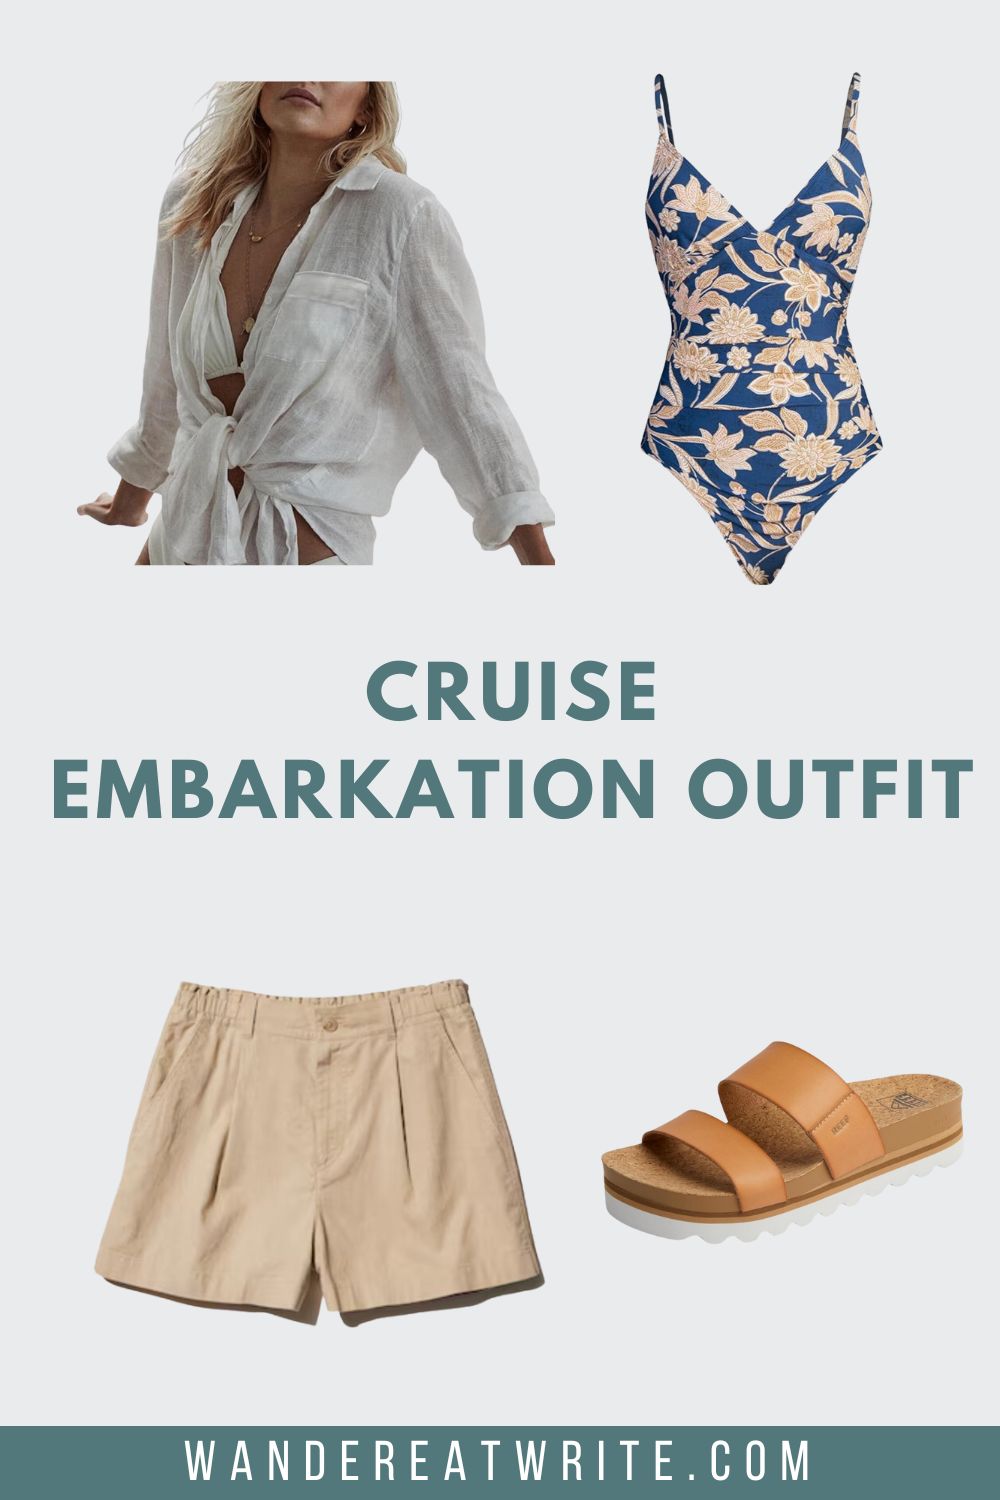 Women's cruise embarkation outfit ideas. Photos clockwise from top left: a woman wearing a white linen button down, a navy one-piece swimsuit with beige floral pattern, tan sandals, beige linen shorts